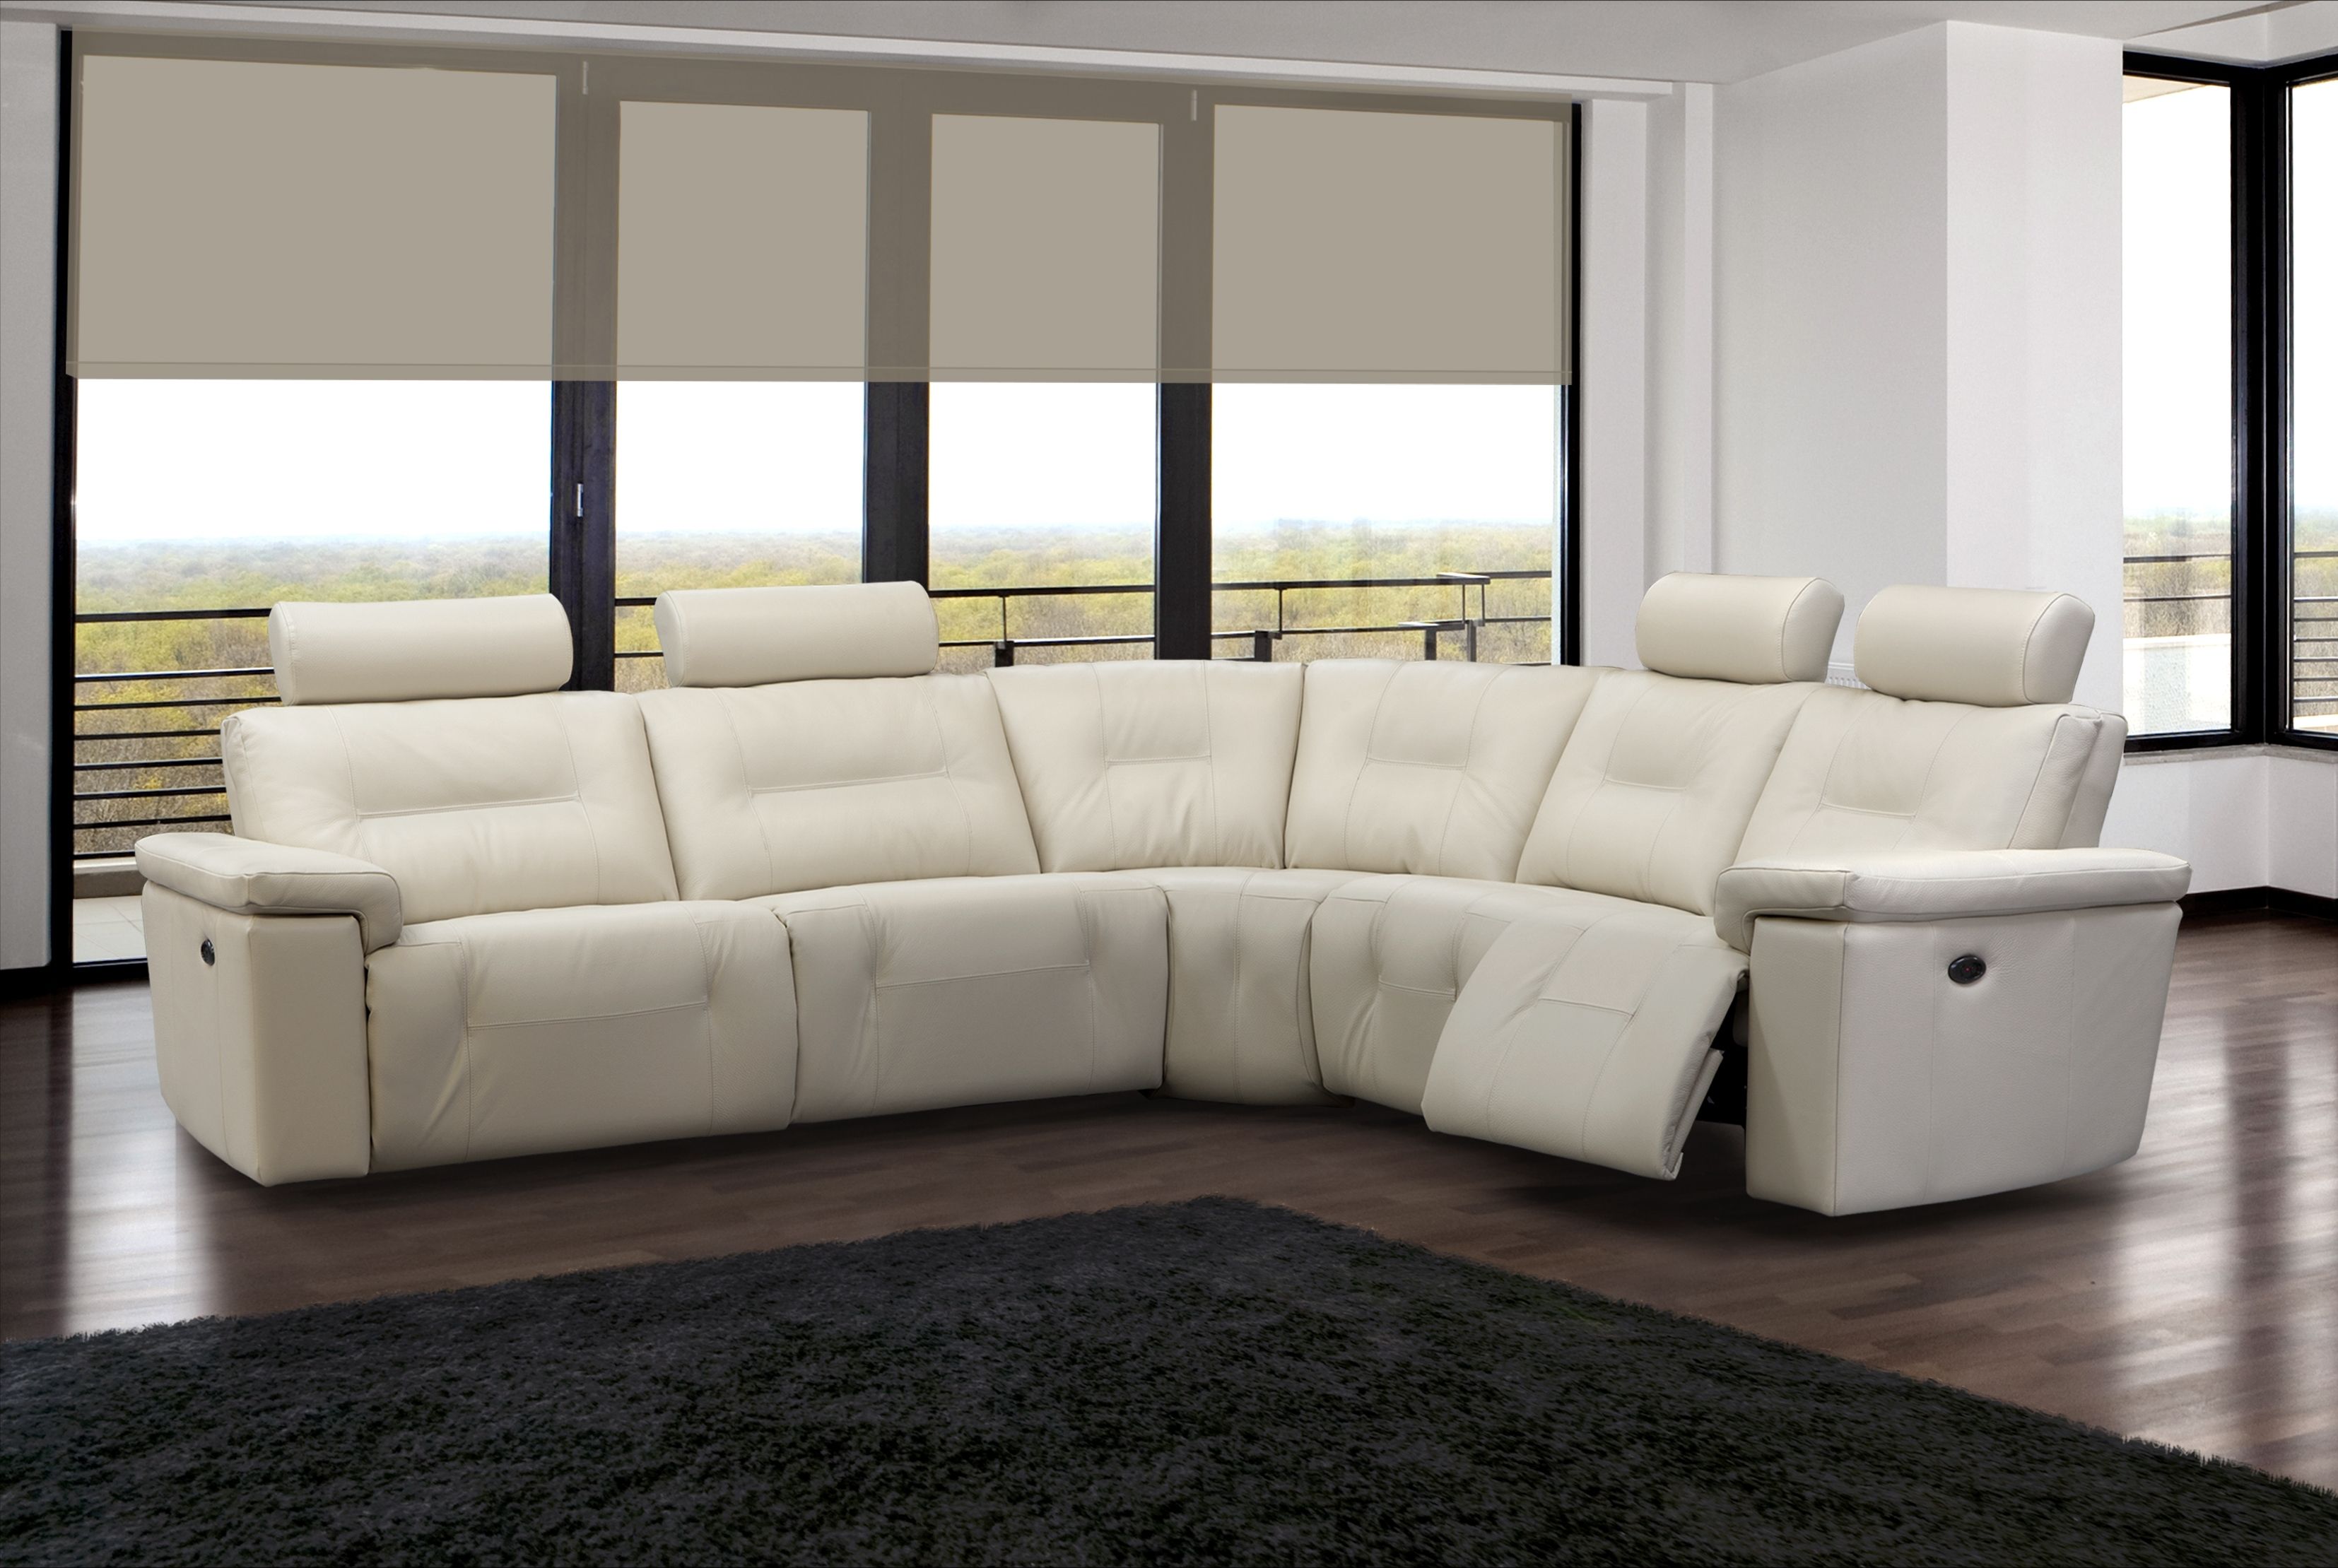 Elran Sofas Sectionals | Thecreativescientist Intended For Economax Sectional Sofas (View 3 of 10)